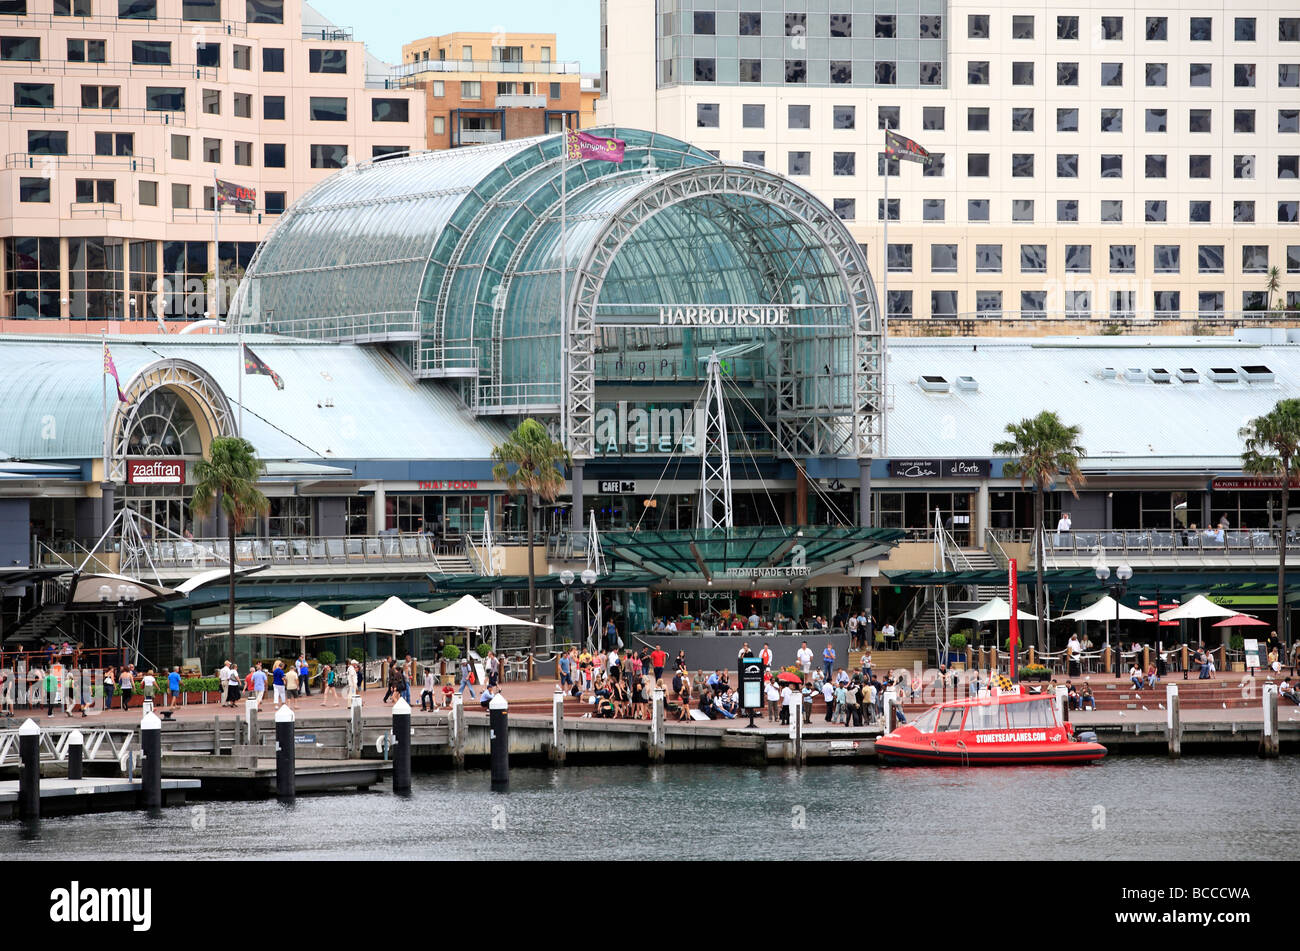 Harbourside shopping centre restaurants and hotels at Darling Harbour  Sydney Australia Stock Photo - Alamy